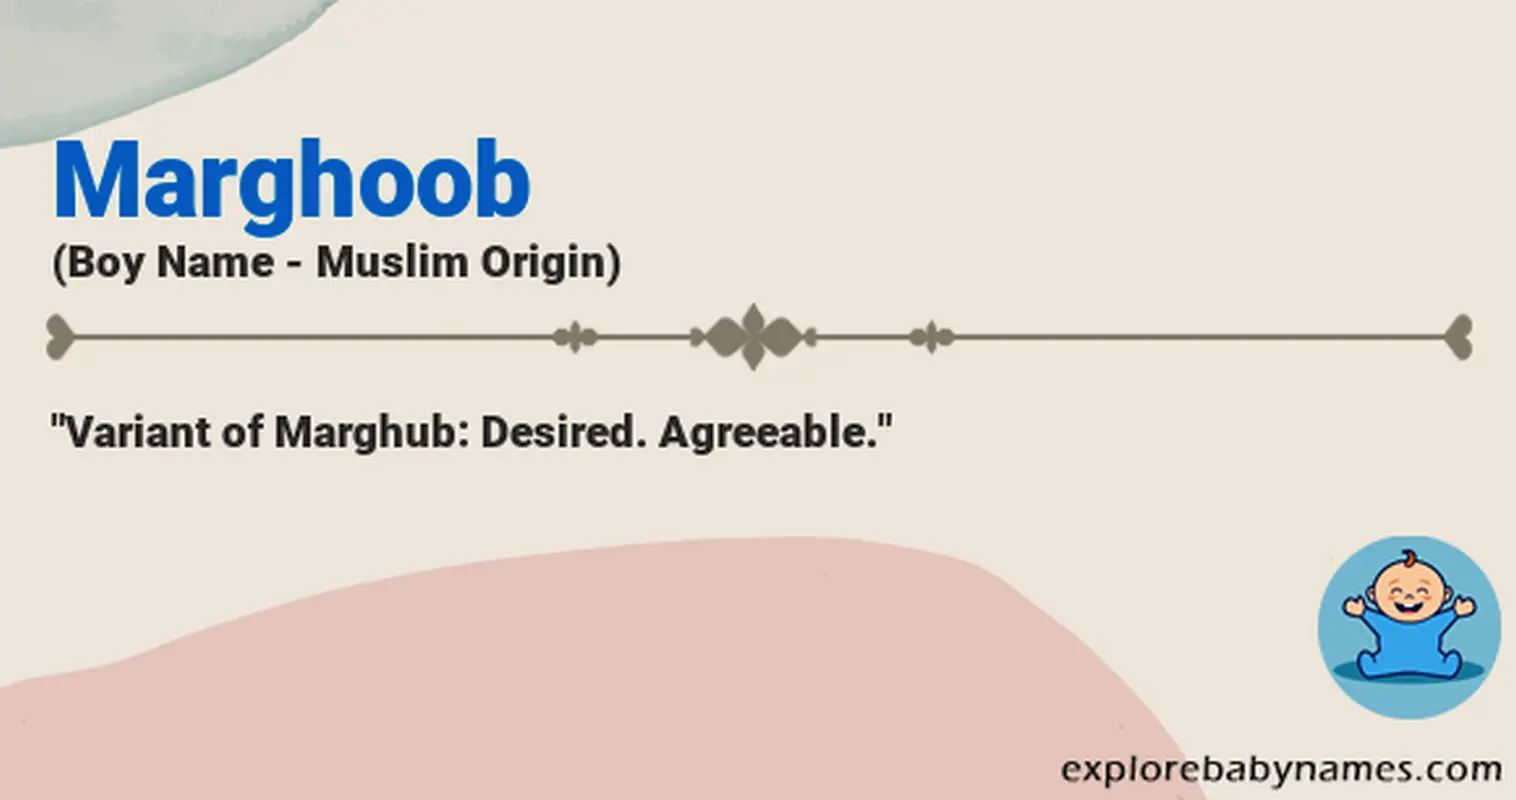 Meaning of Marghoob